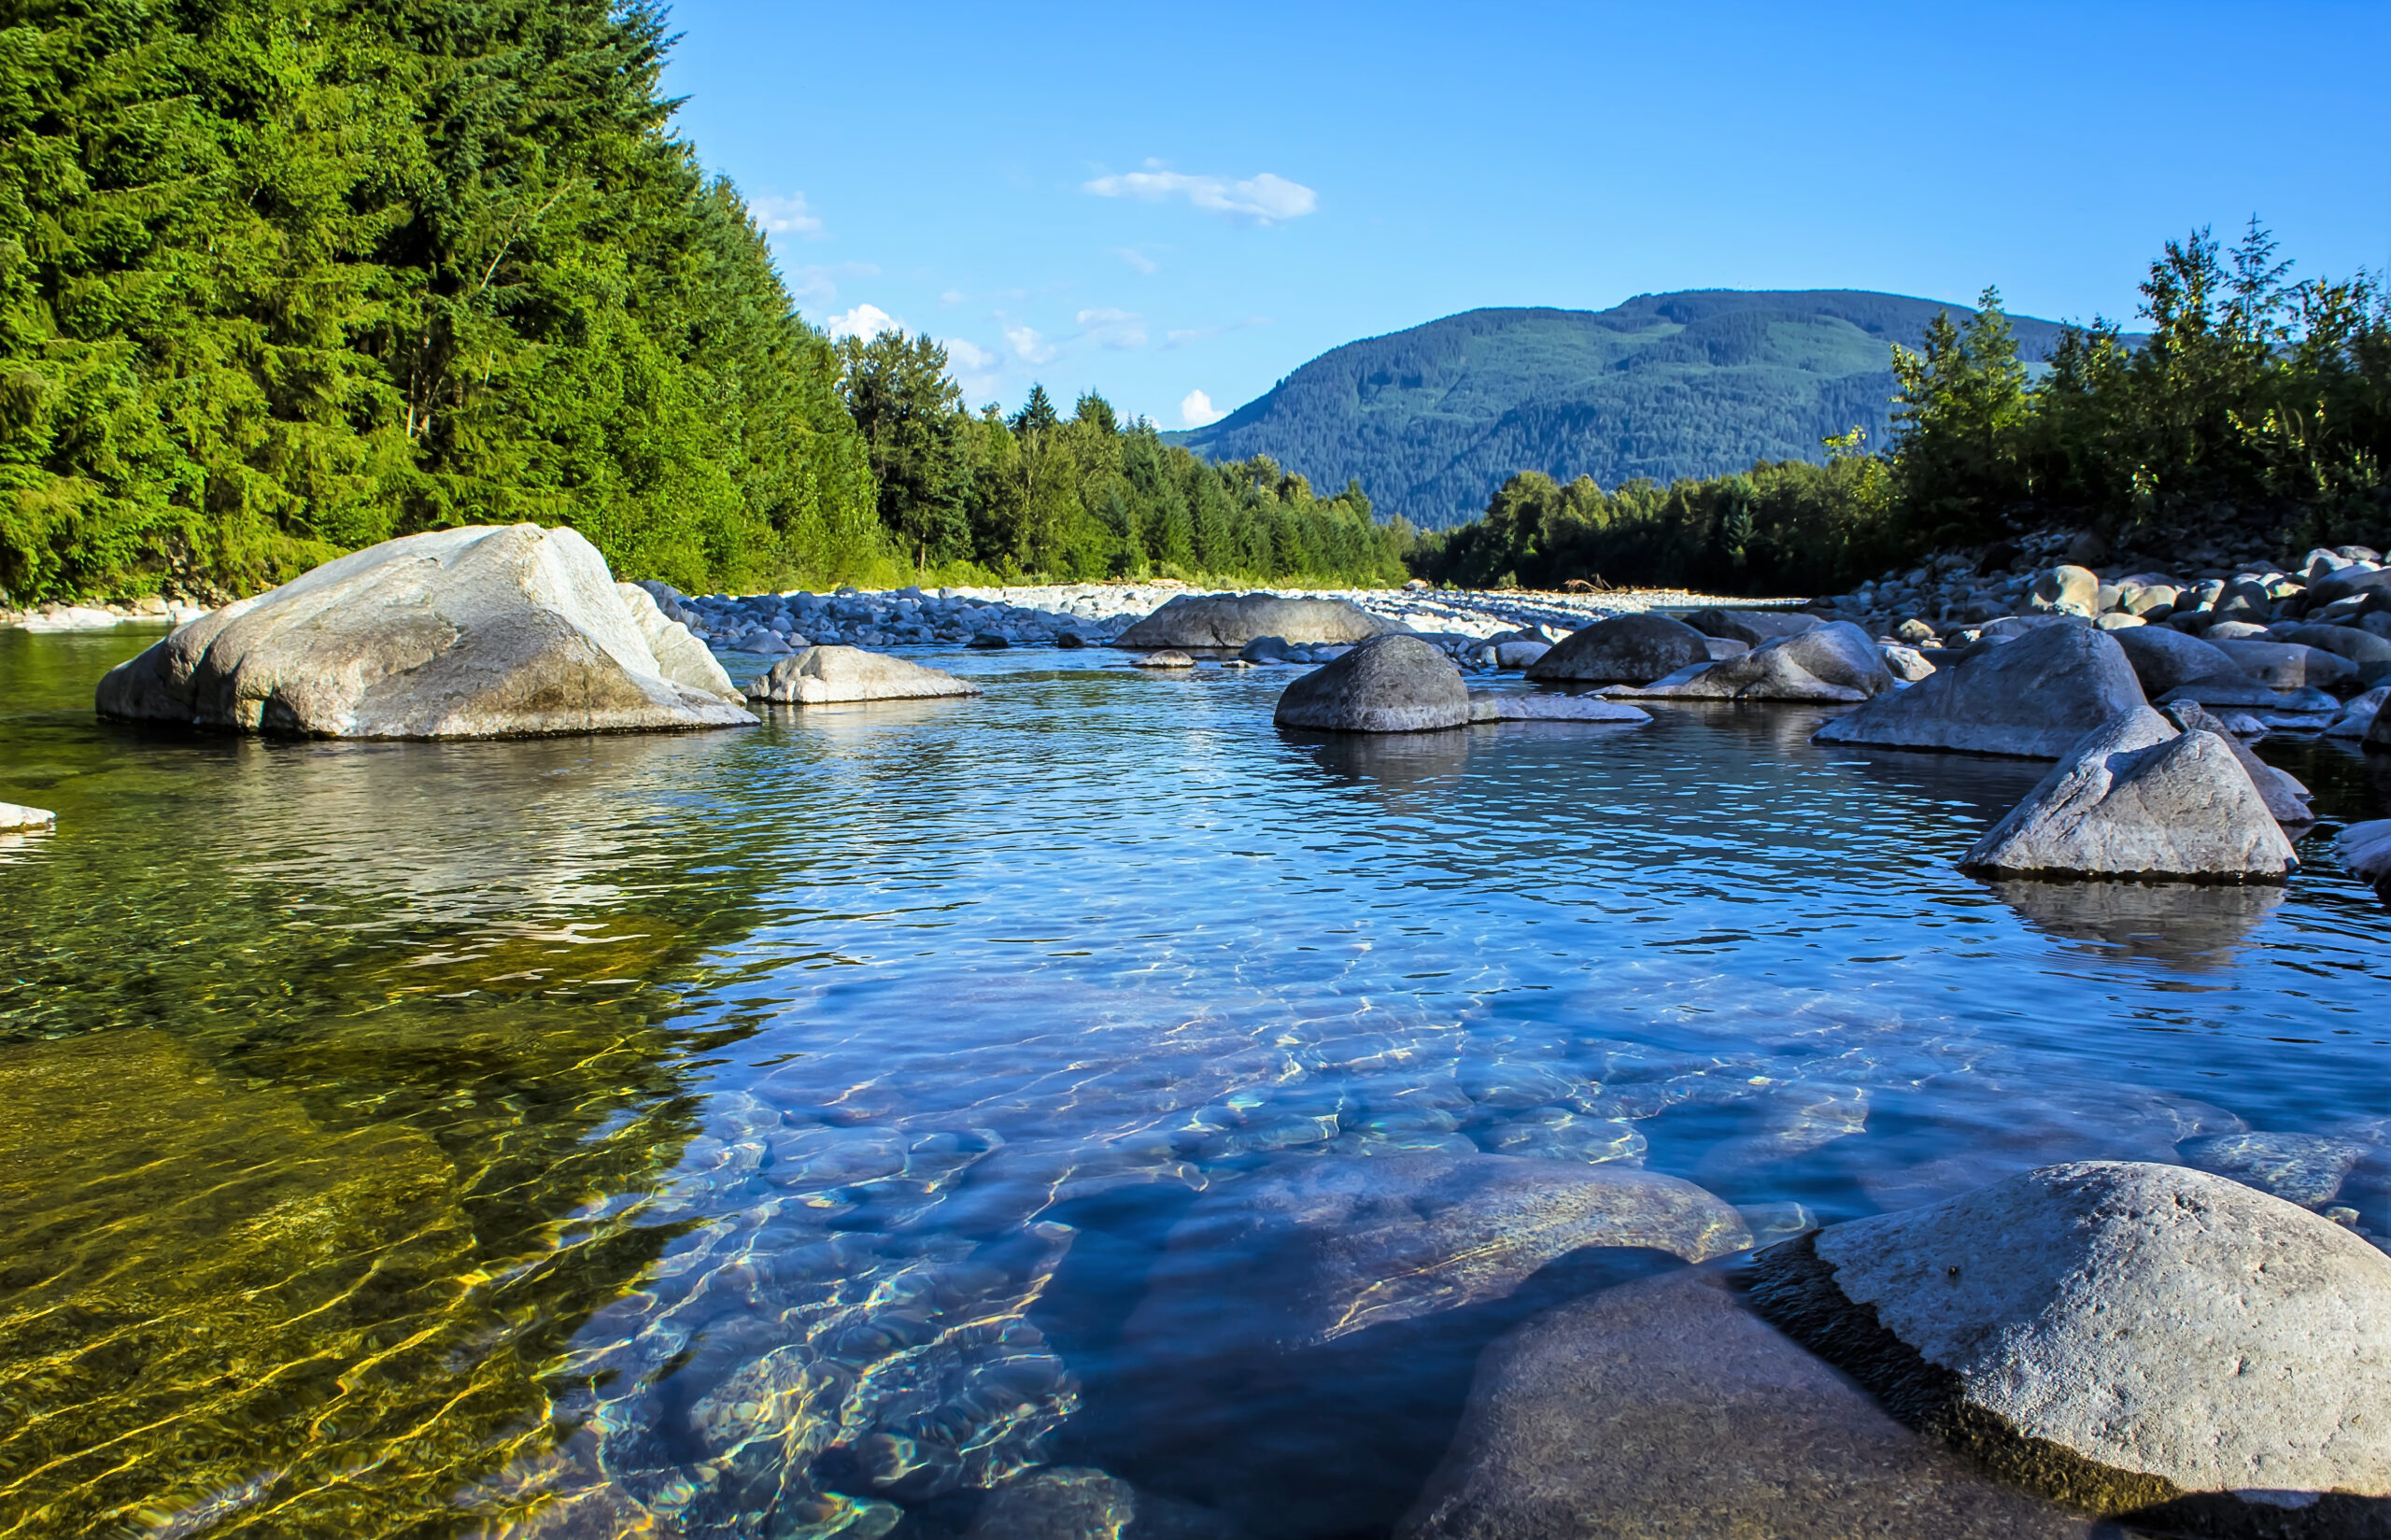 An outdoor landscape: clear water spotted with large rocks can be seen among green trees, a blue sky, and a mountain in the distance.